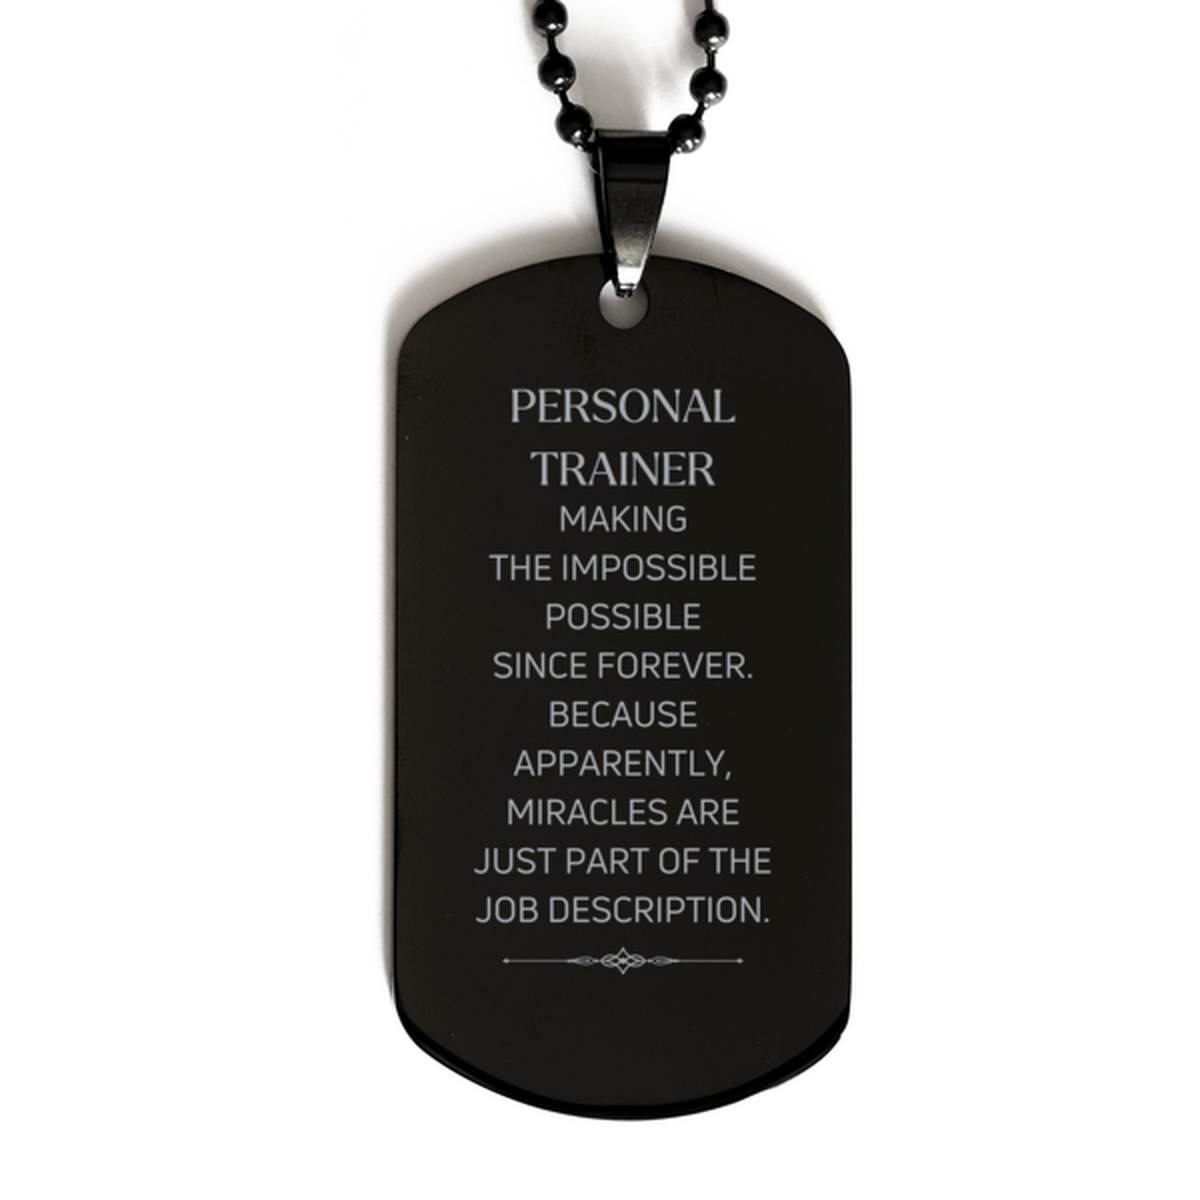 Funny Personal Trainer Gifts, Miracles are just part of the job description, Inspirational Birthday Black Dog Tag For Personal Trainer, Men, Women, Coworkers, Friends, Boss